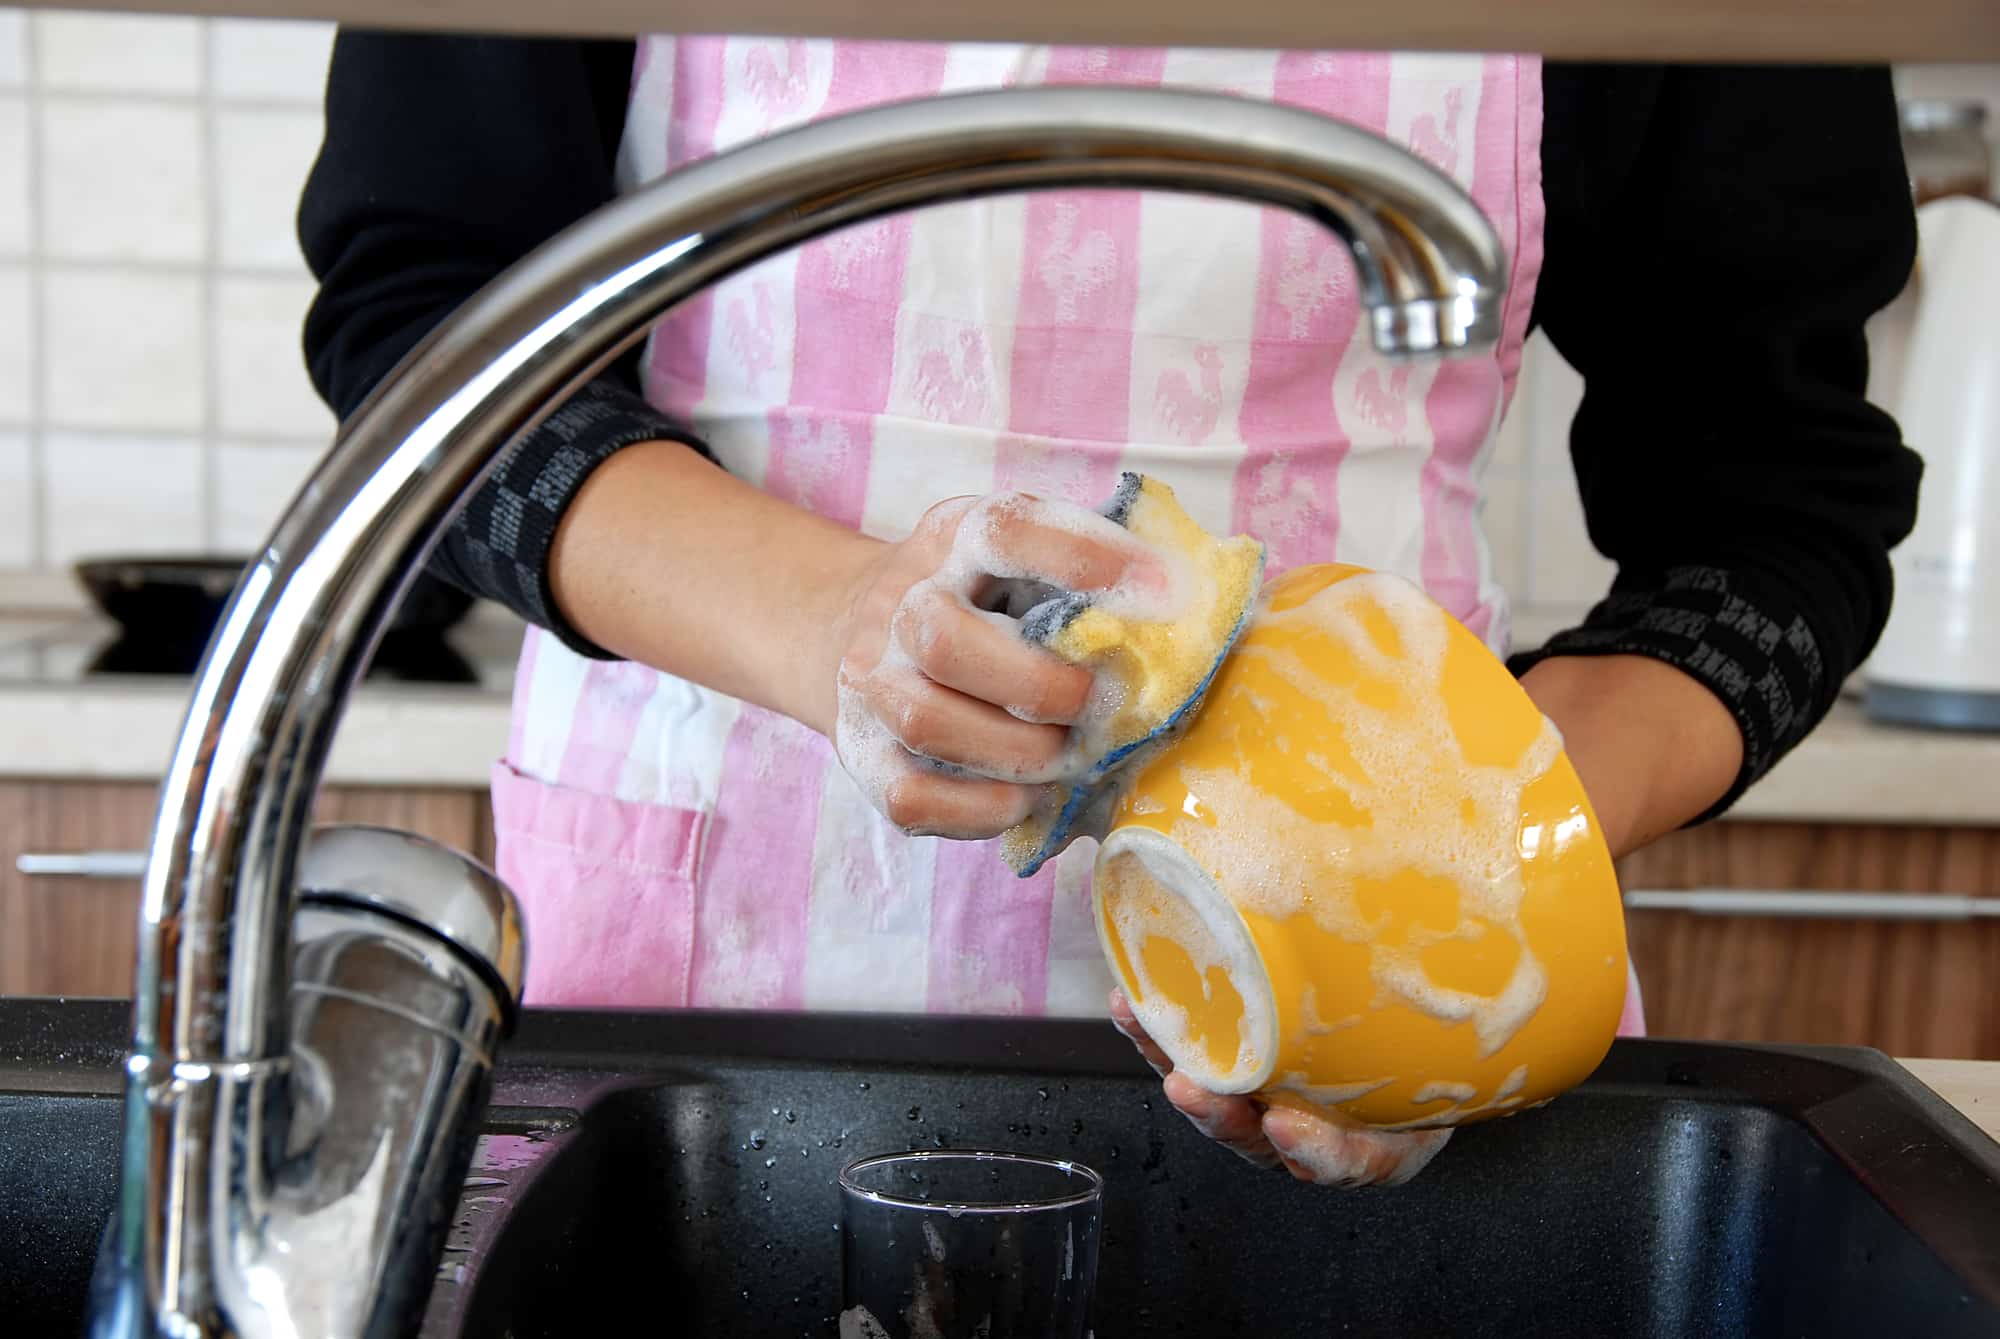 hands with sponge washing dishes in kitchen sink